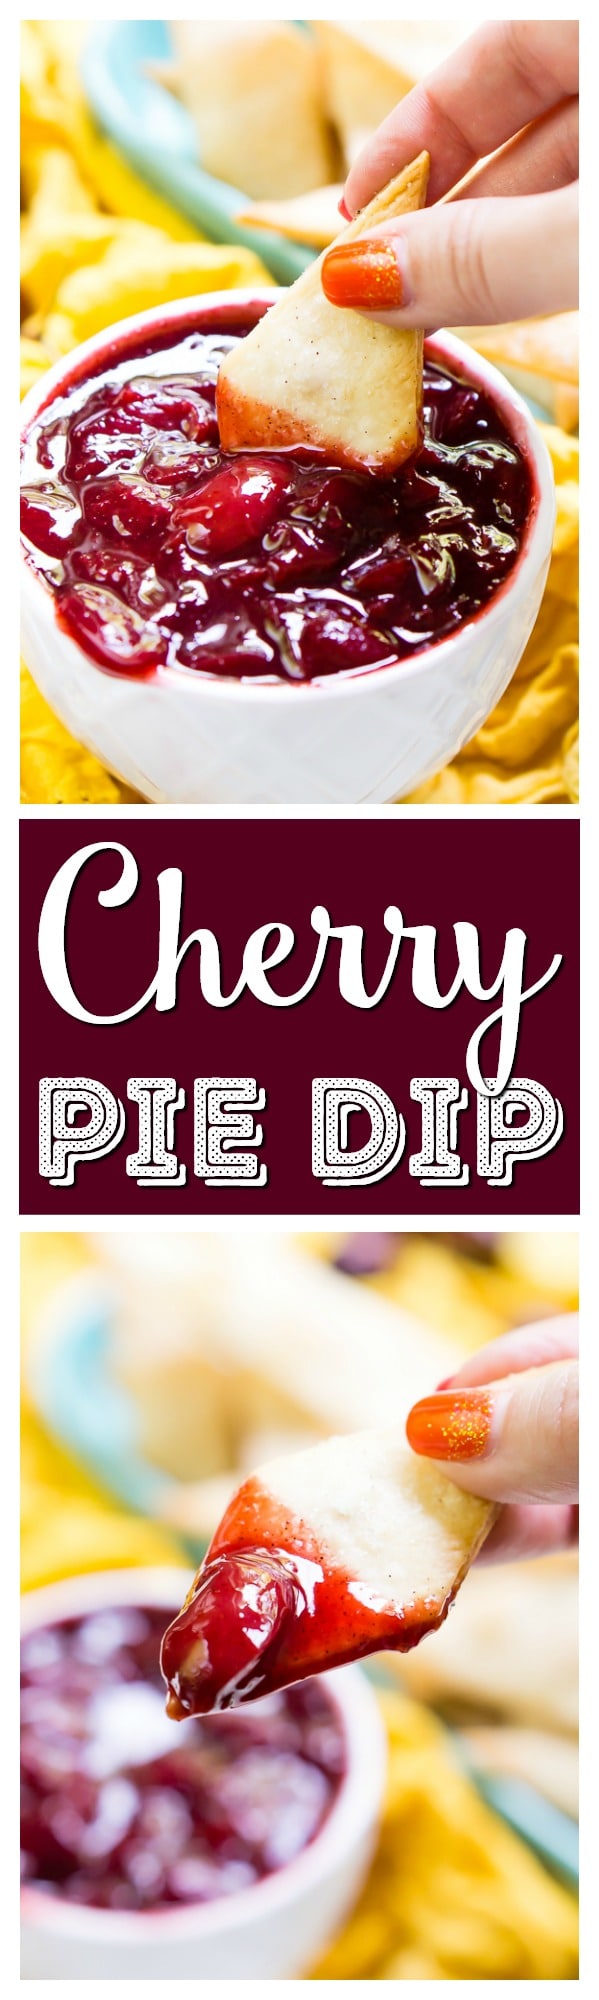 This Cherry Pie Dip is all the deliciousness of the classic pie but easier to make and perfect for parties! Fresh cherries are simmered into a thick and gooey dip served with cinnamon sugar pie chips! via @sugarandsoulco